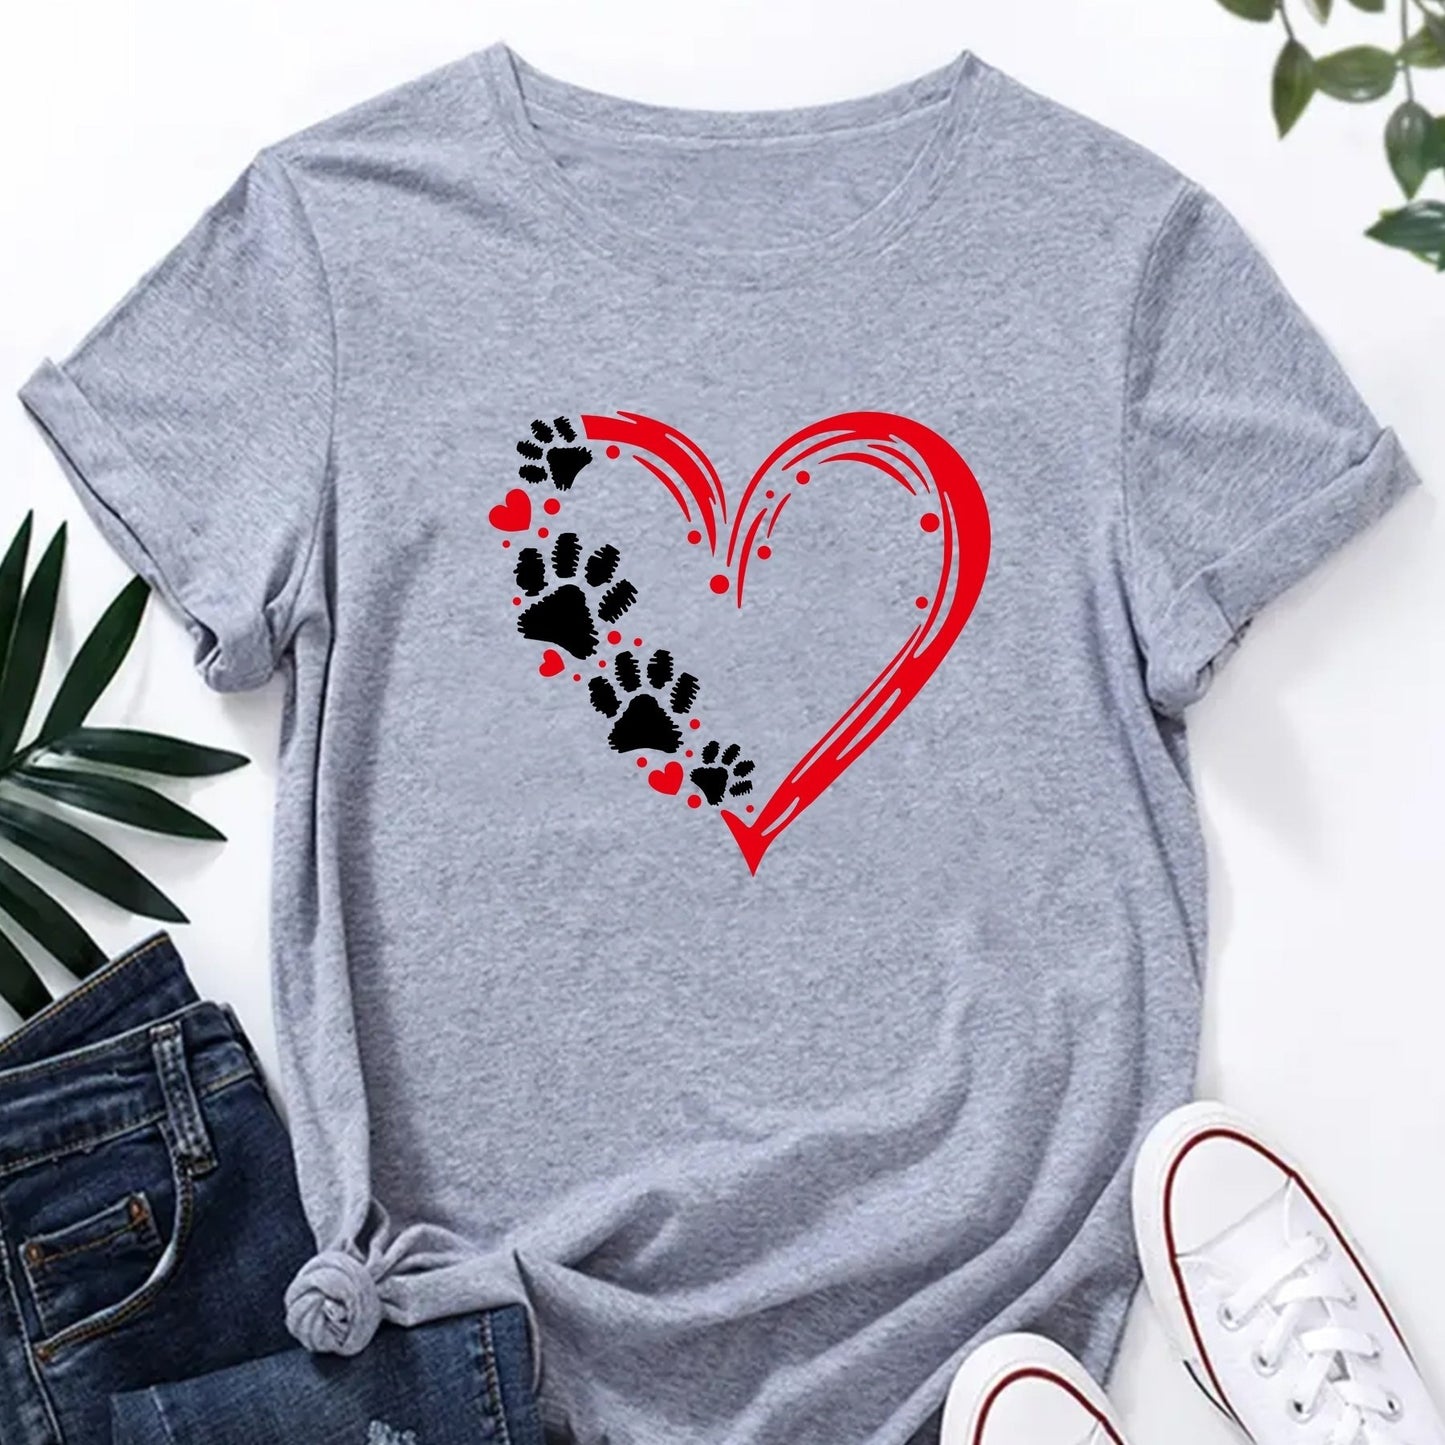 Dog Paw Print T-Shirt, Short Sleeve Crew Neck Casual Top For Spring & Summer, Women's Clothing